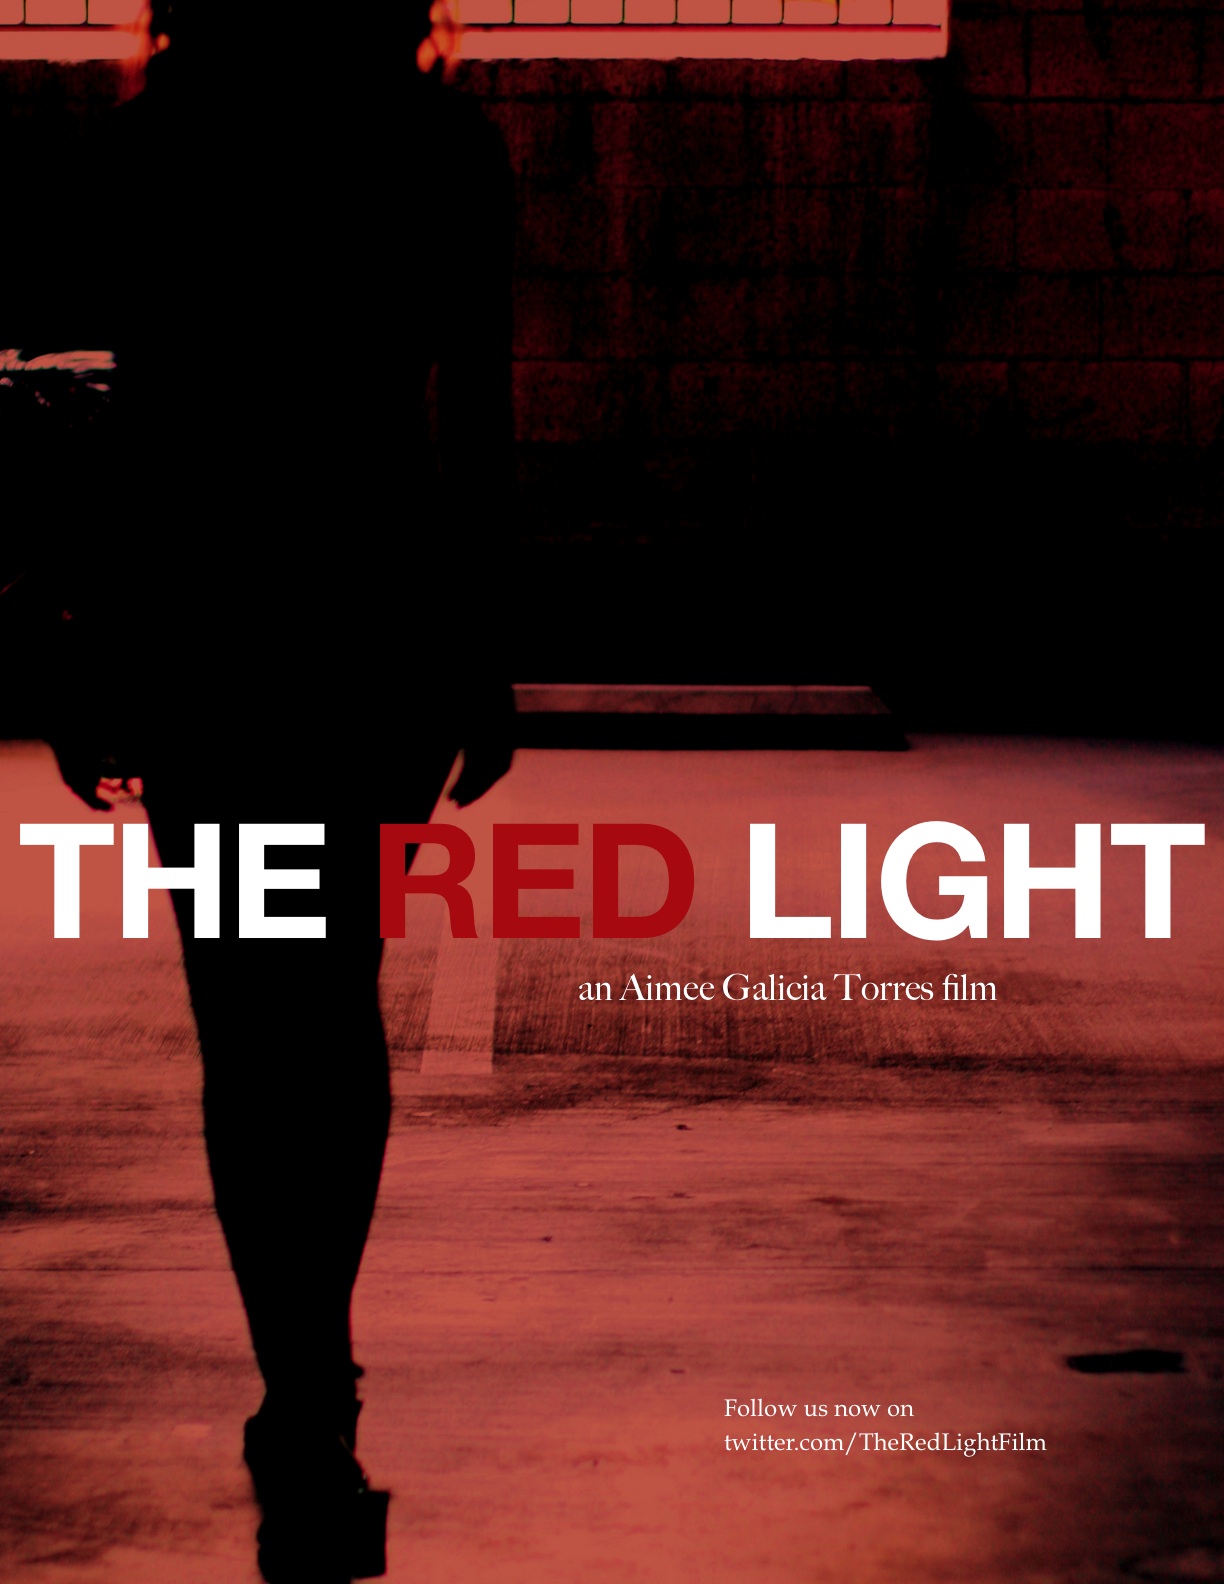 The Red Light is a feature film directed by Aimee Galicia Torres. Coming soon. www.themajestic.org